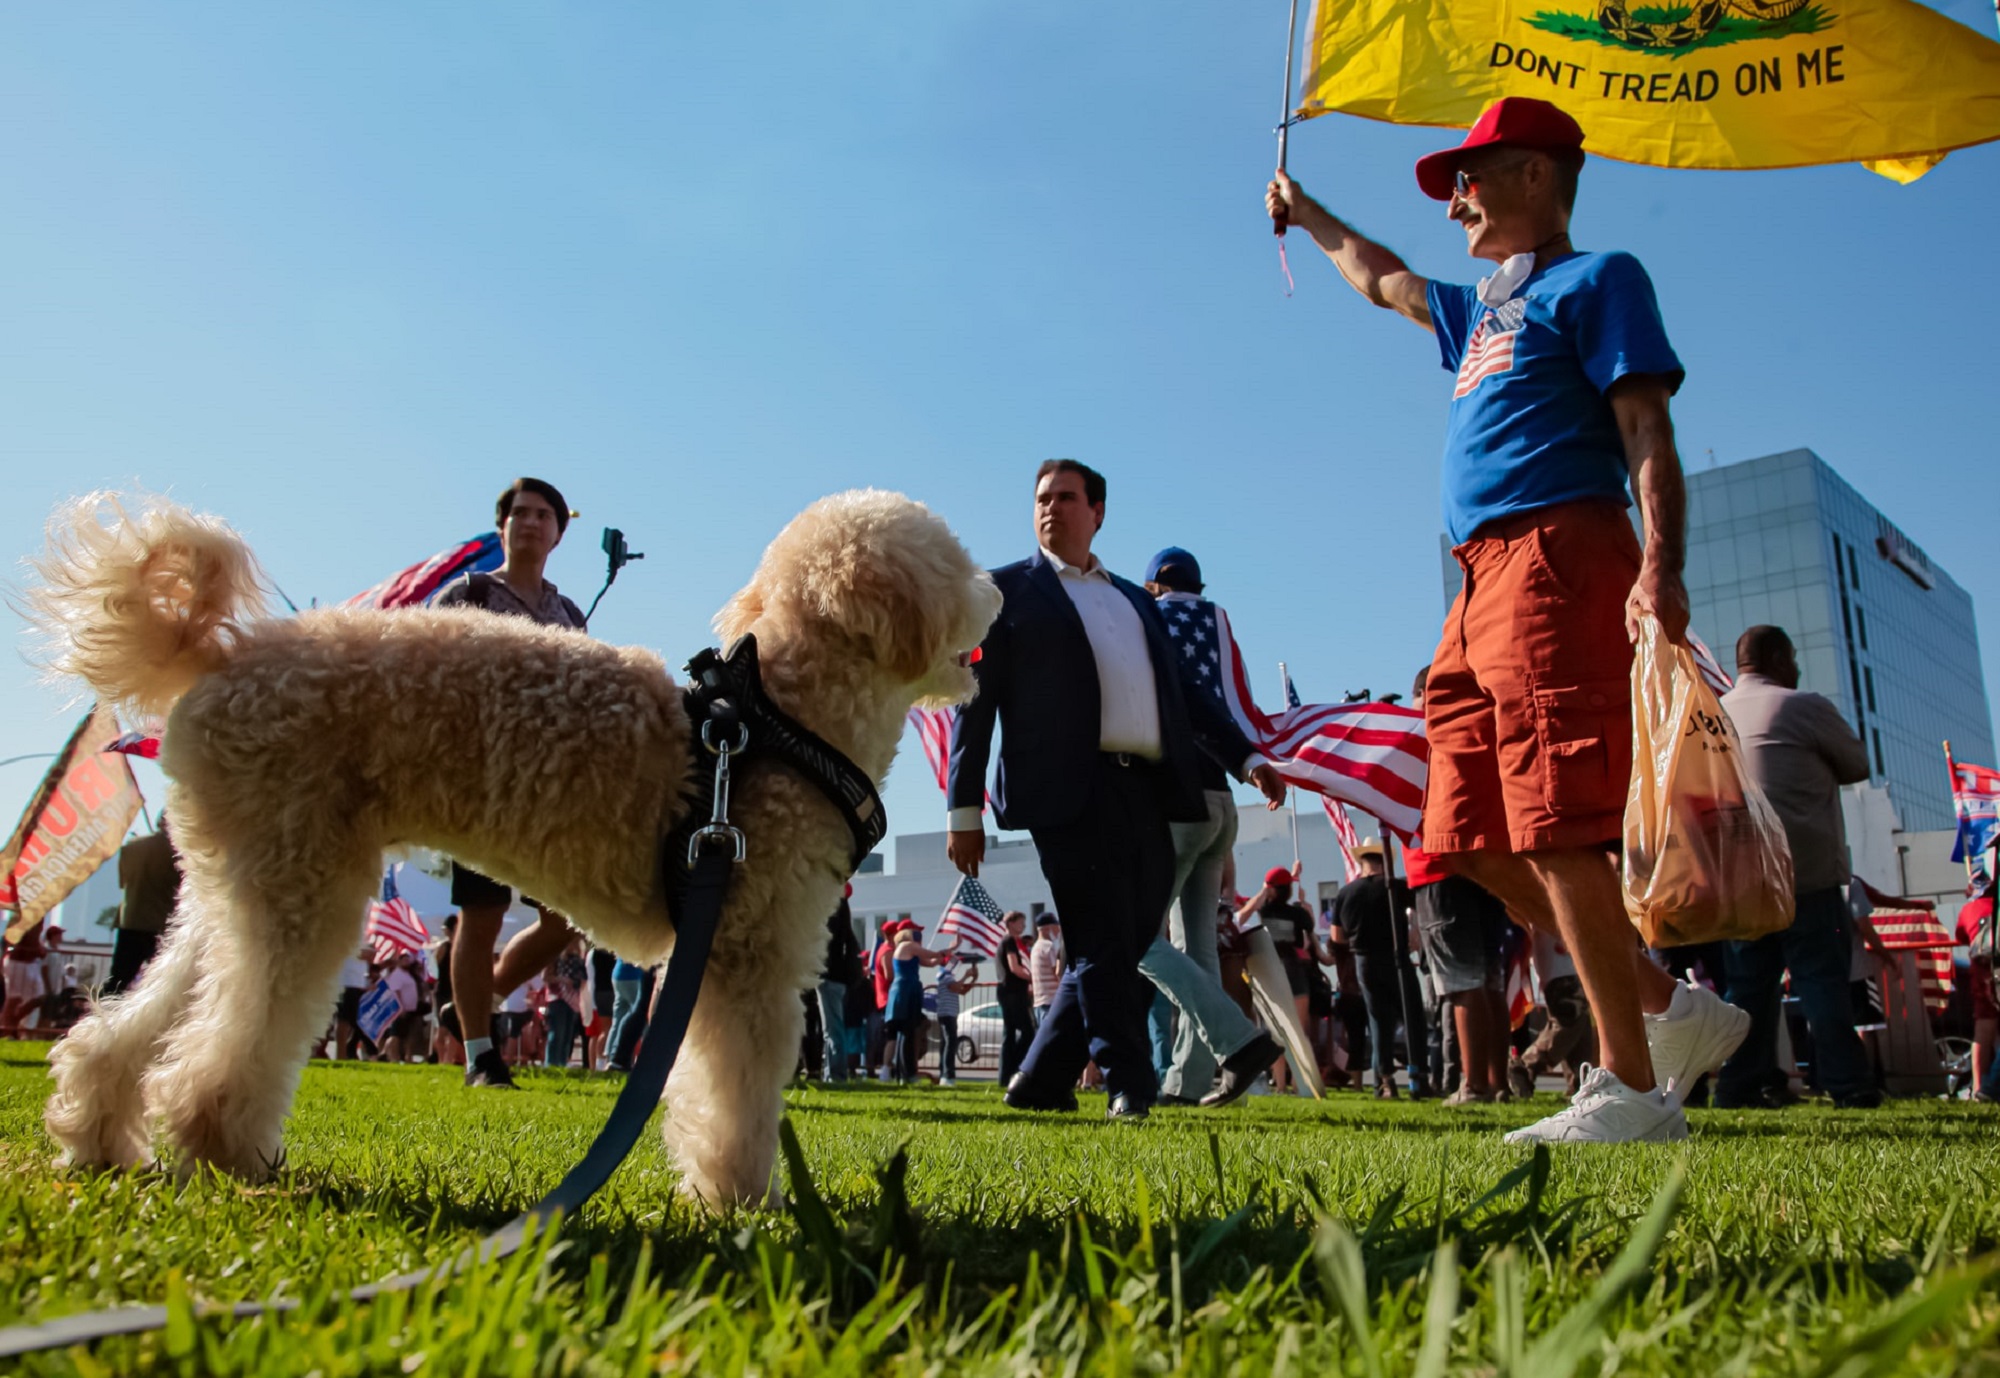 Labradoodle dog looking at a person in a blue shirt with a yellow "don't tread on me" flag